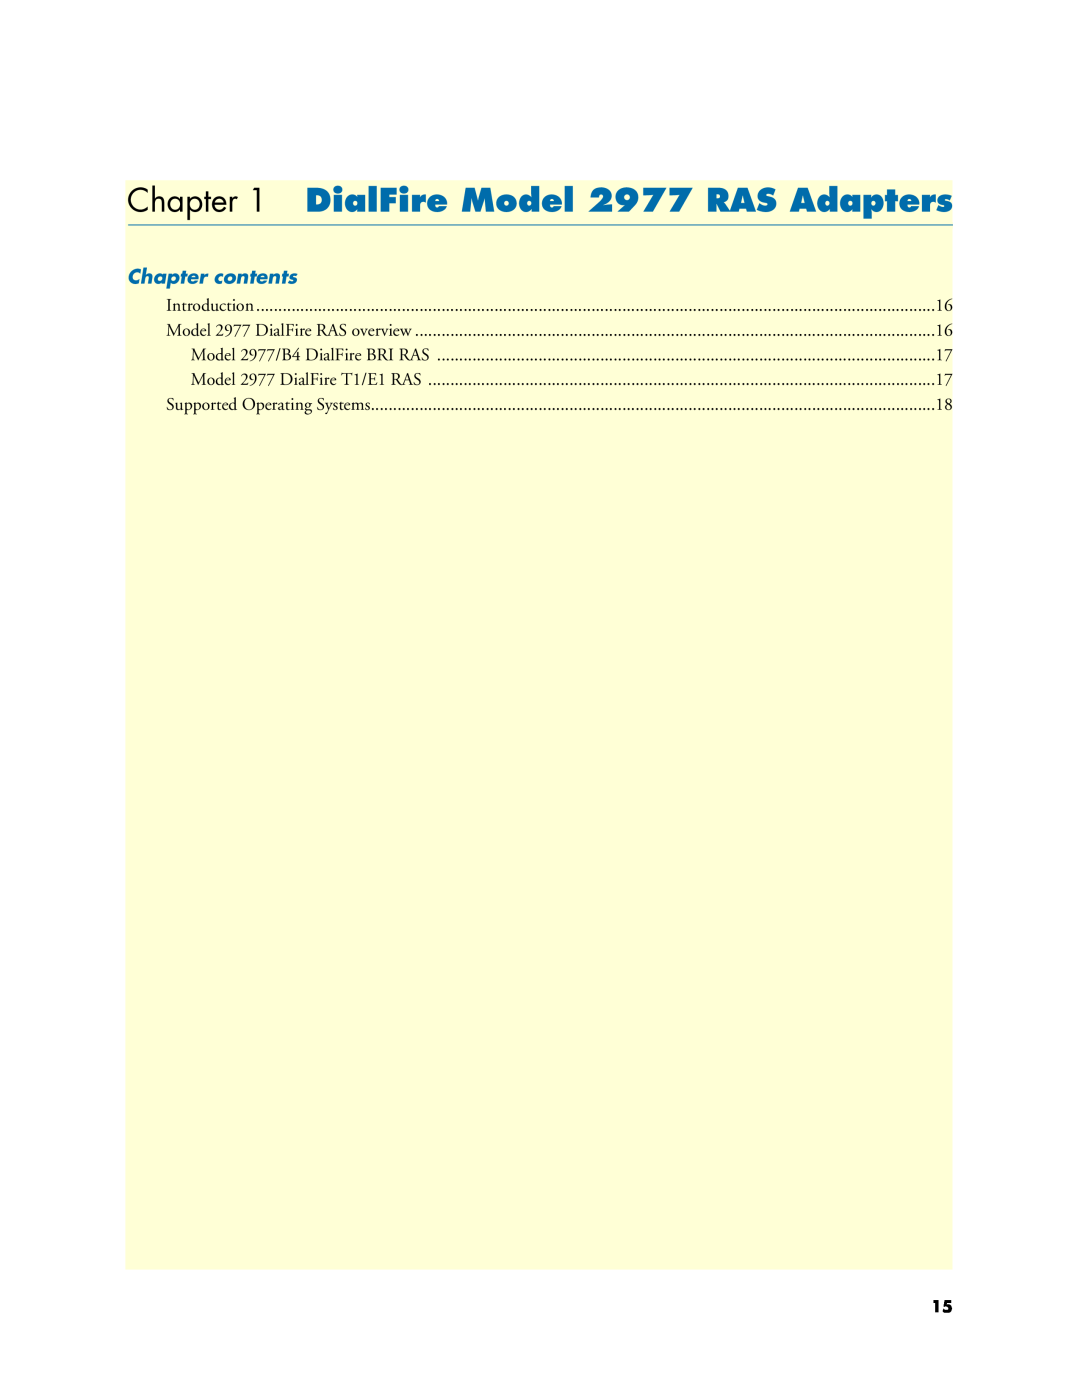 Patton electronic manual DialFire Model 2977 RAS Adapters, Chapter contents 